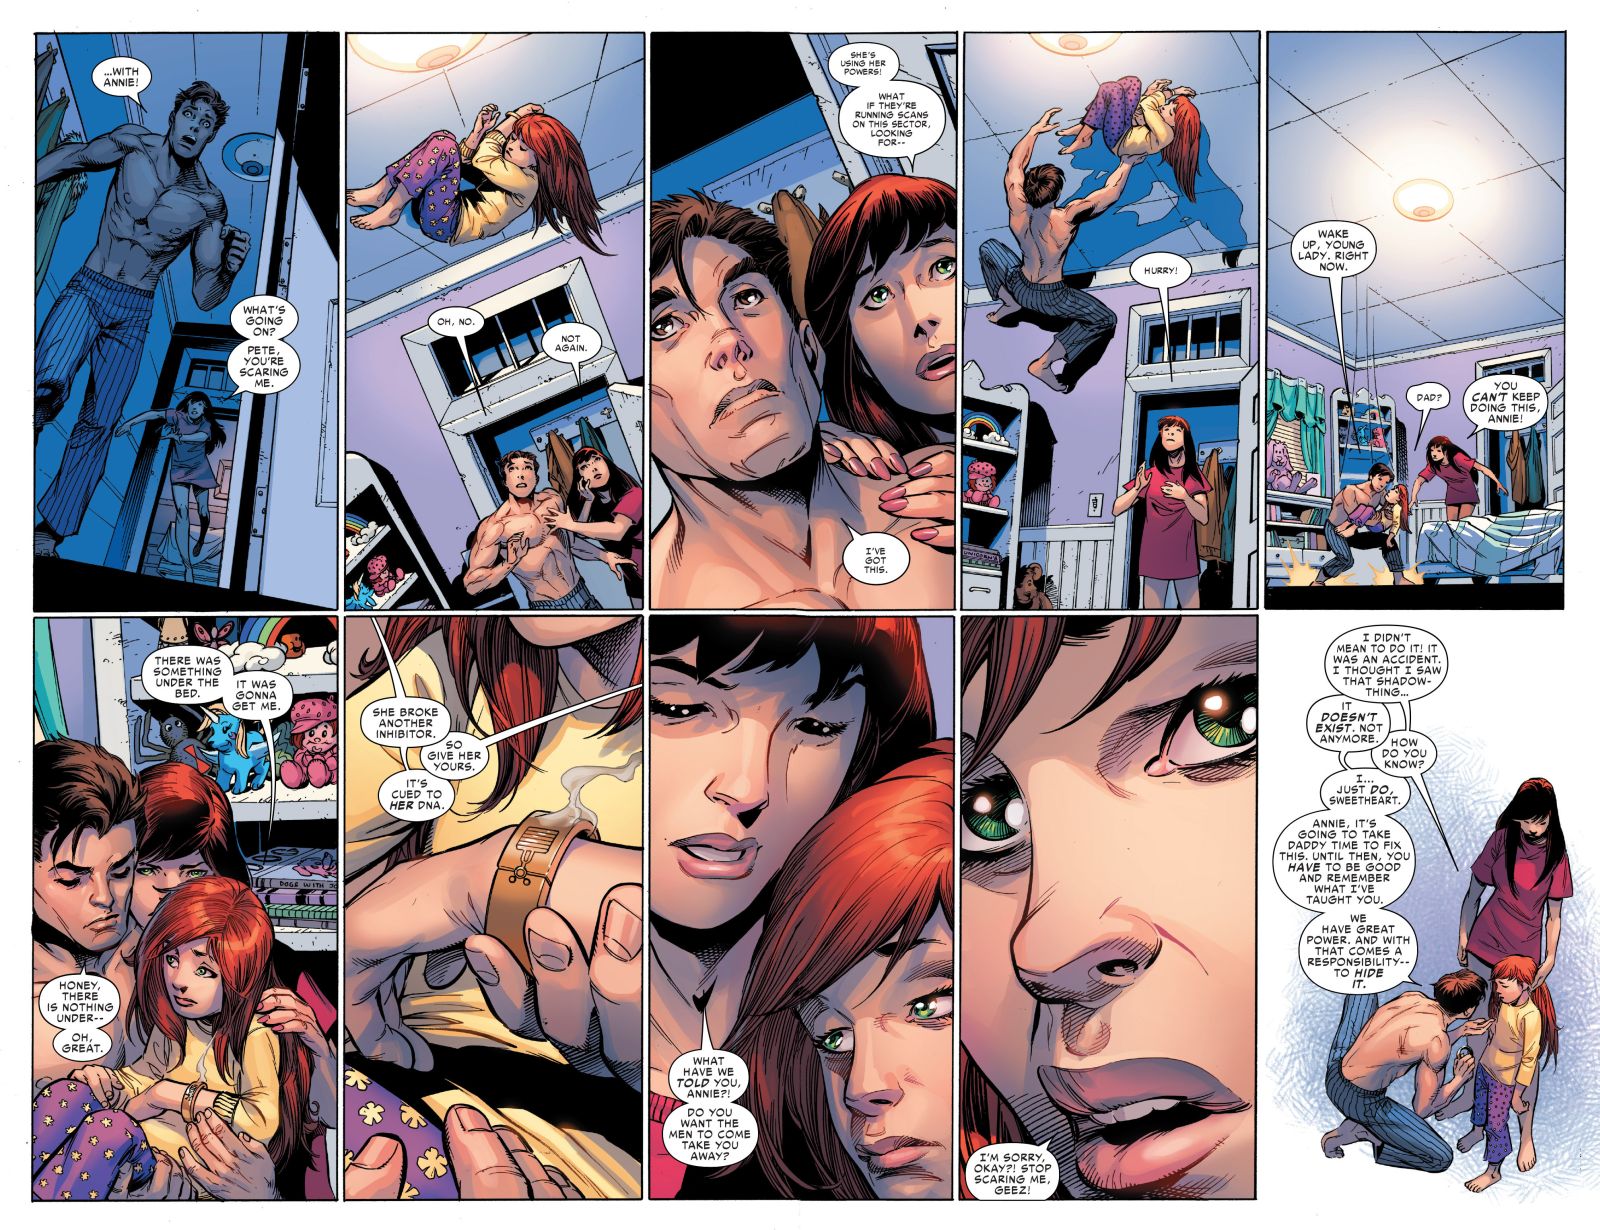 The Amazing Spider-Man: Renew Your Vows #2